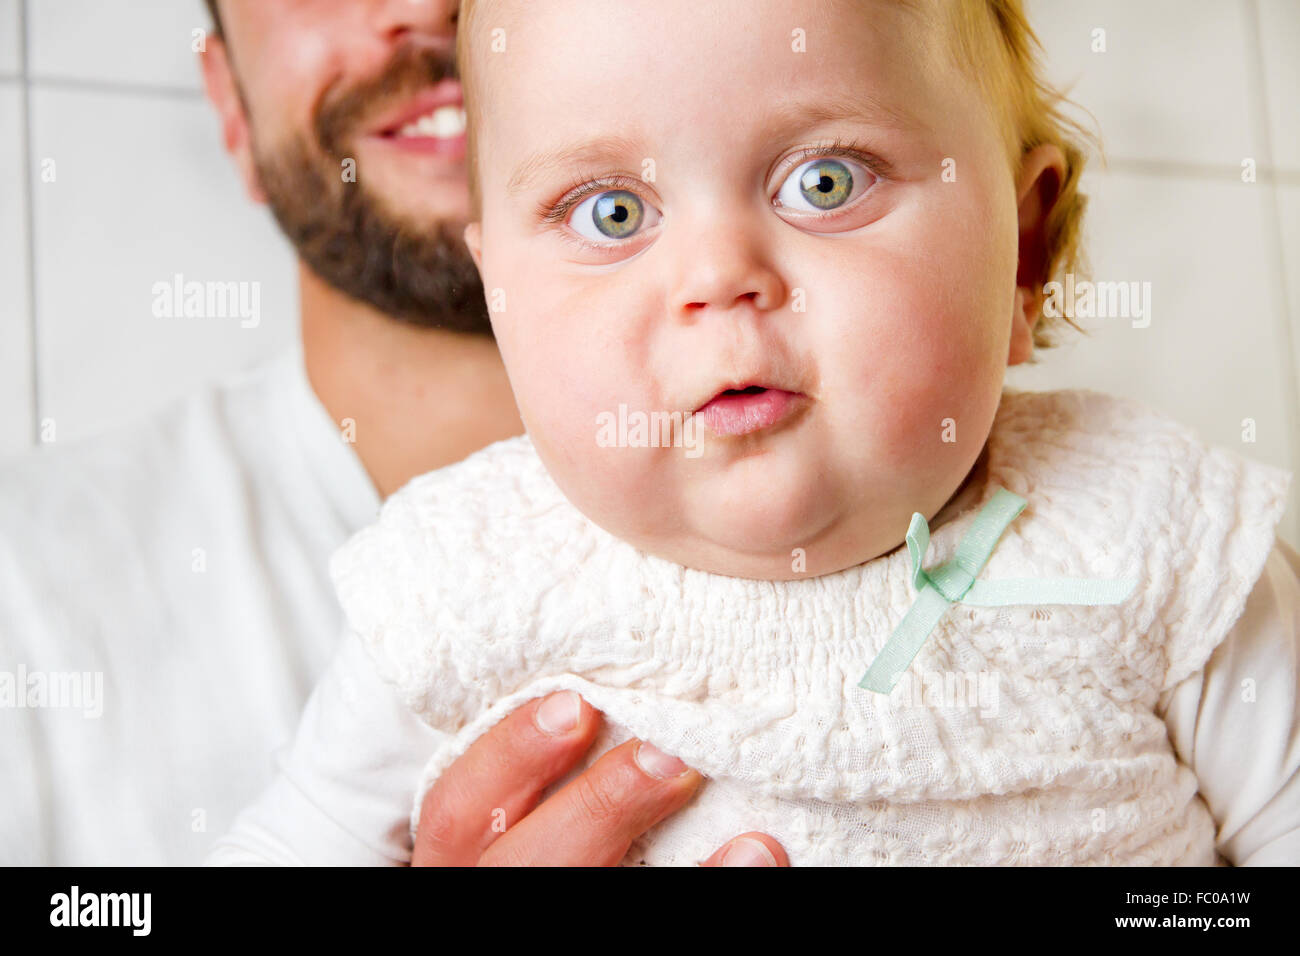 Father and child Stock Photo